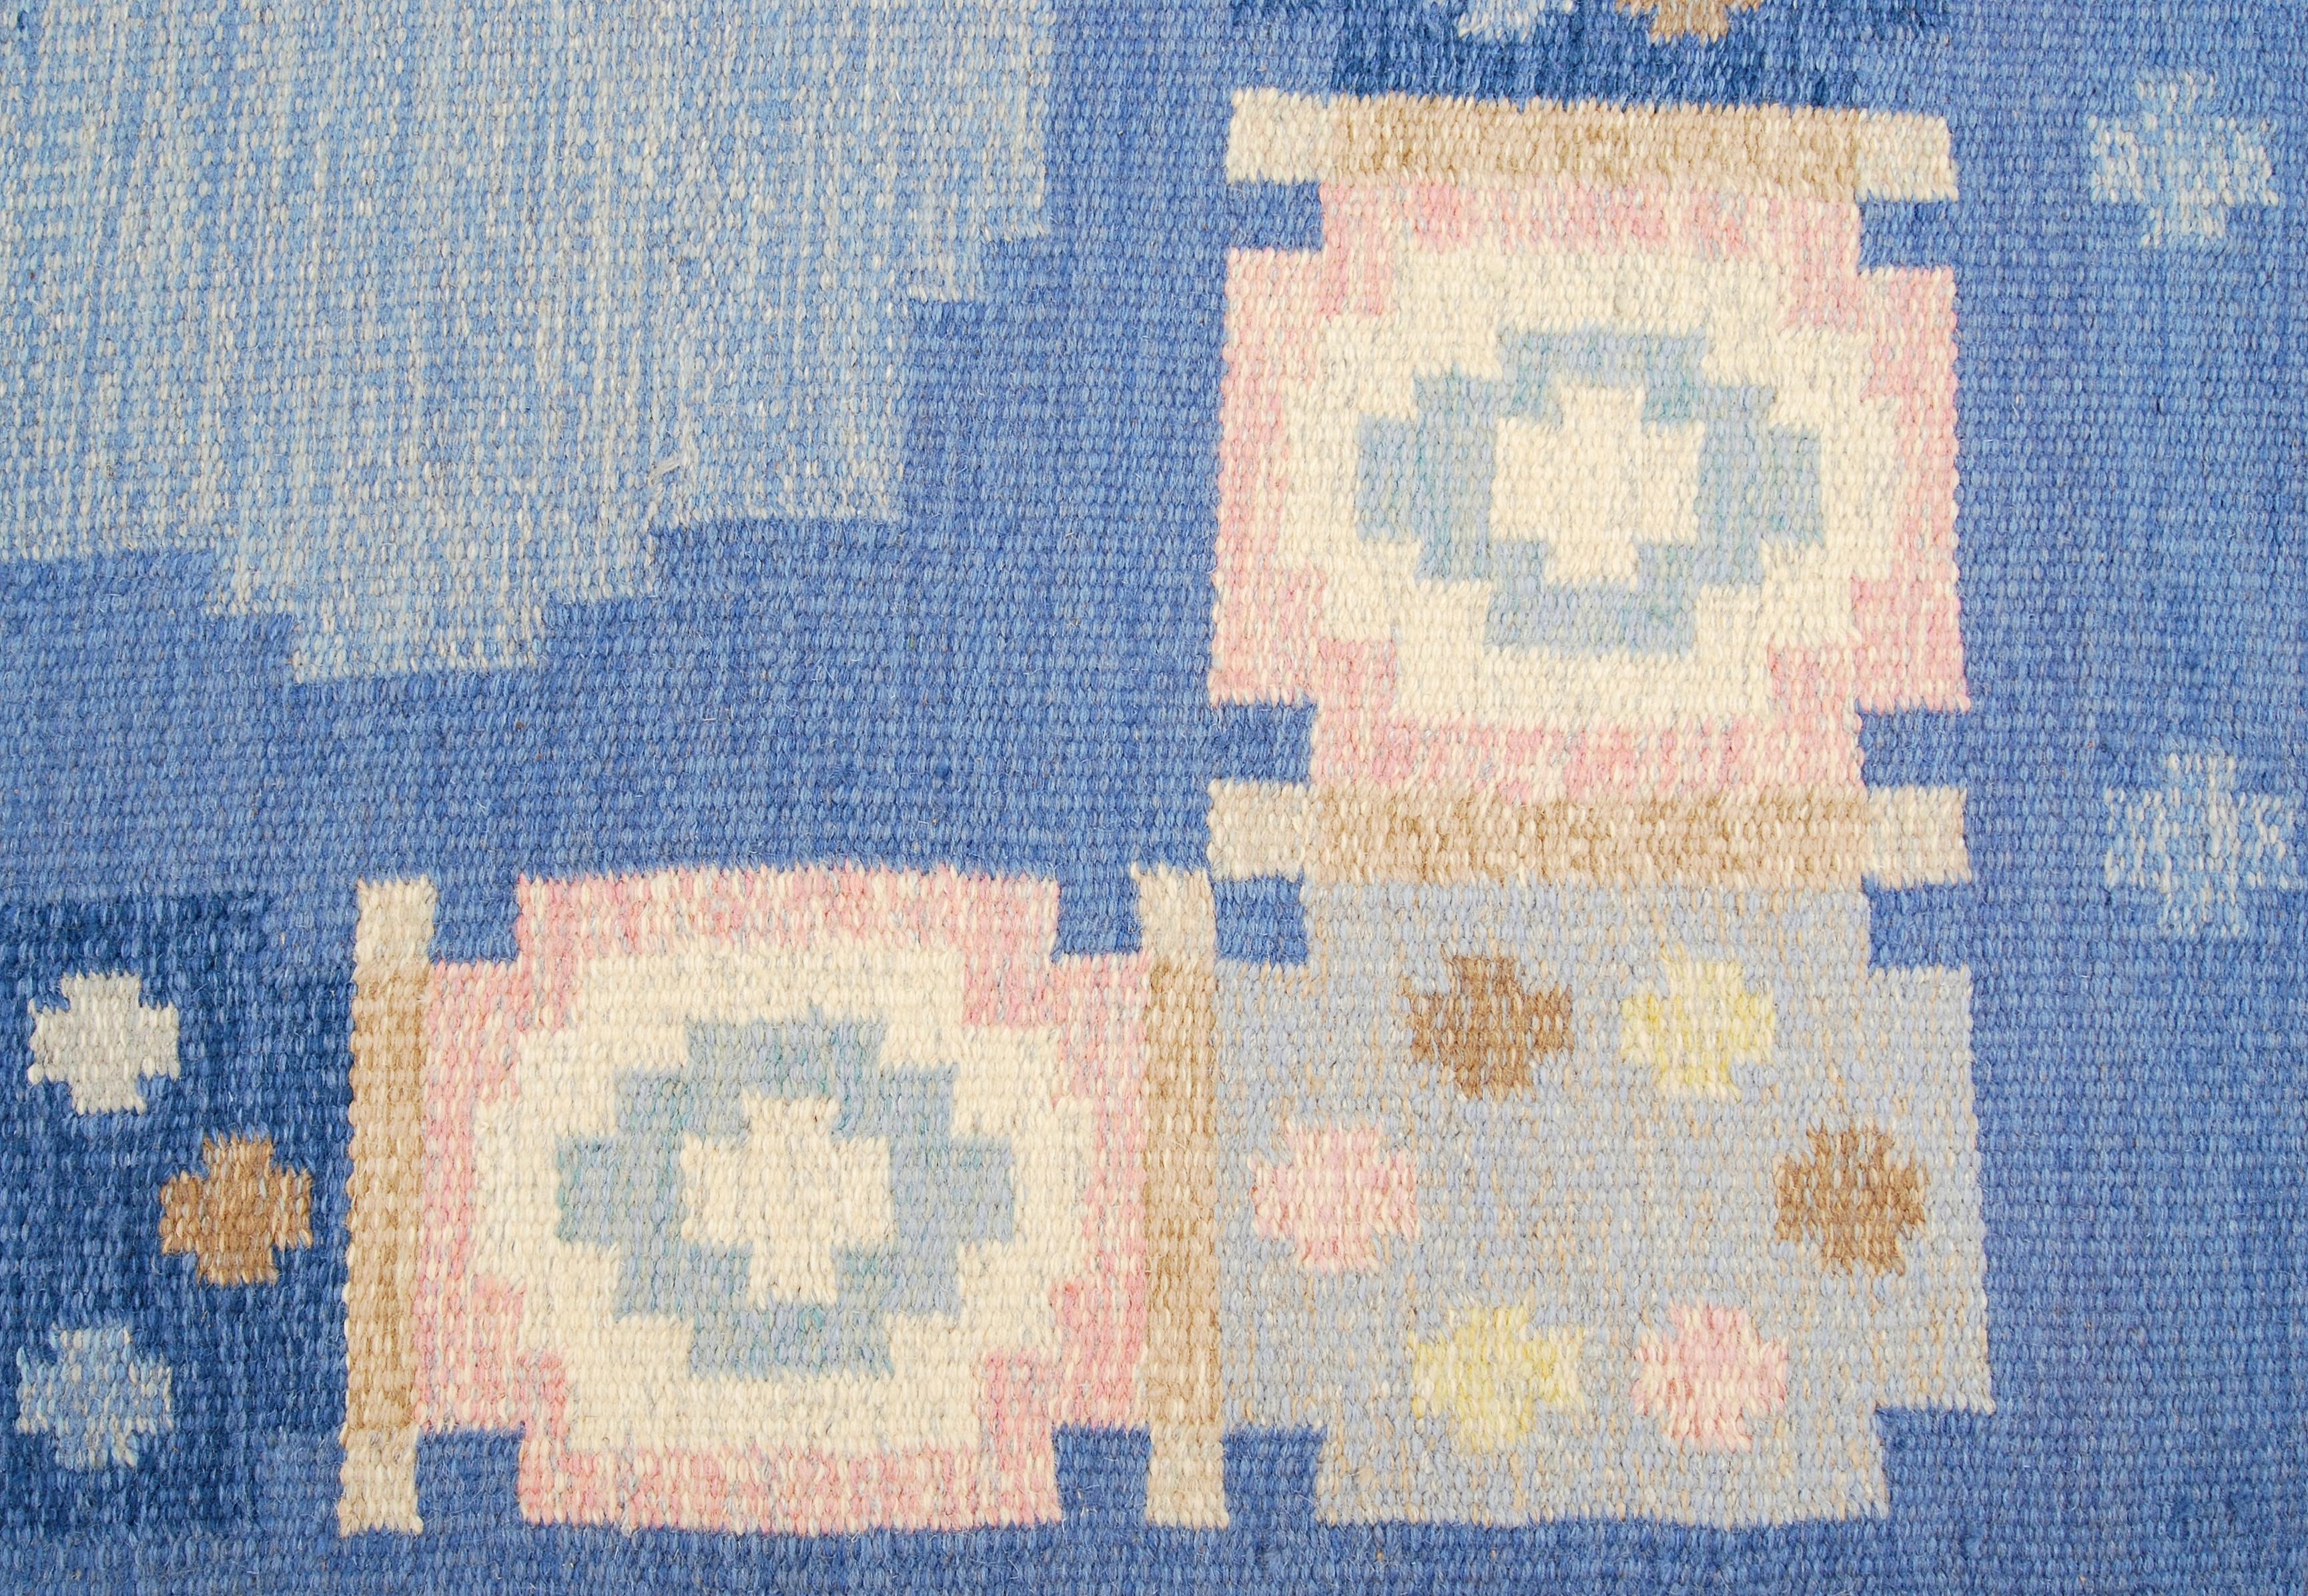 Vintage Swedish flat-weave carpet by Anna Johanna Ångström. This example with fields of three different shades of blue, beige, white, brown, pink and yellow. Handwoven in wool and signed Å to the right hand corner. Professional water cleaned.